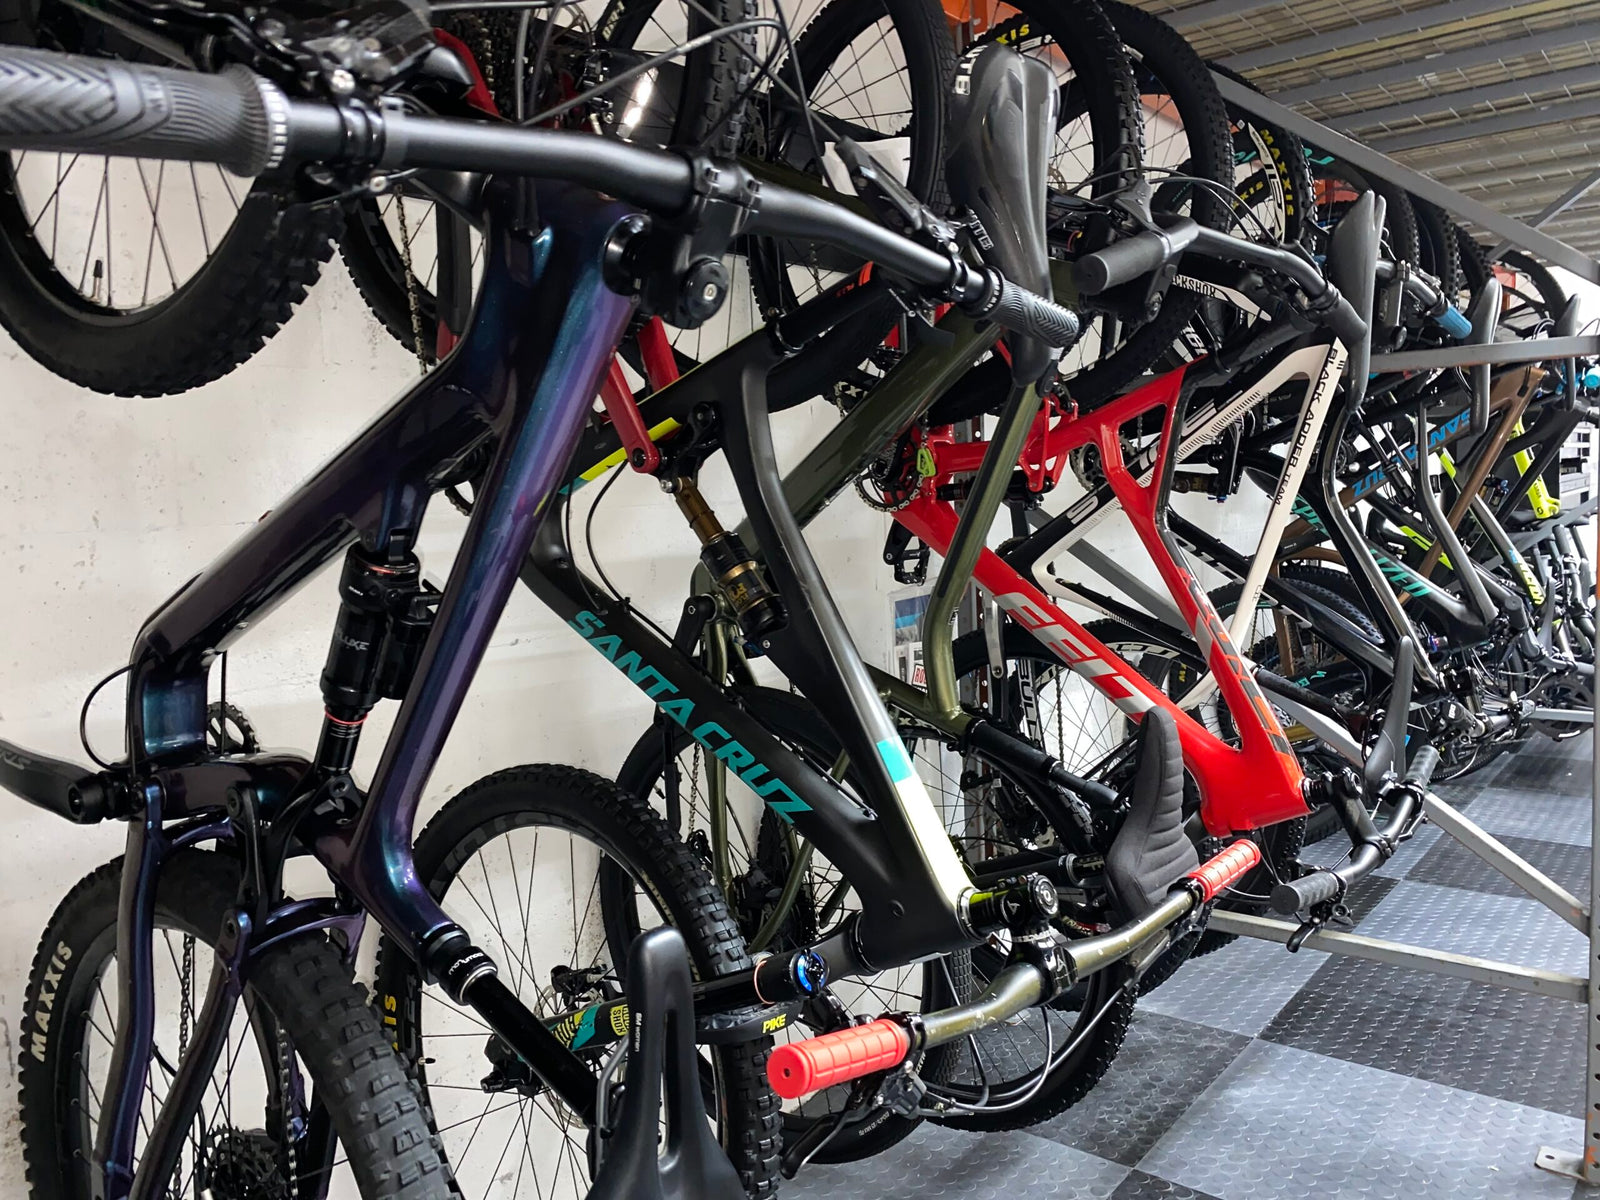 WE BUY BIKES! Cycle Limited wants to buy your used premium mountain, road, or gravel bike